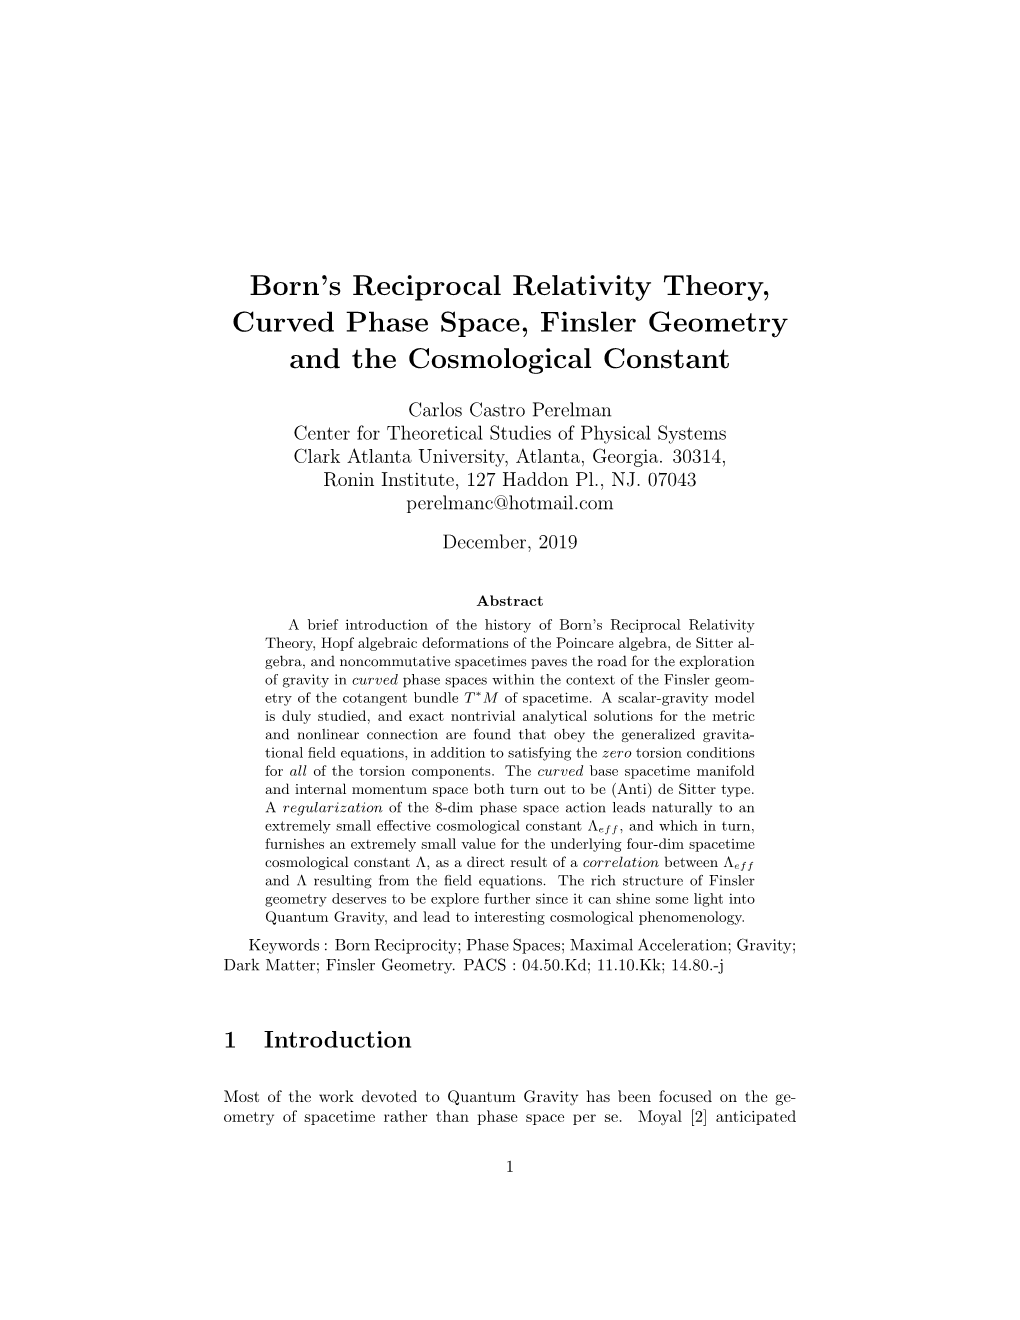 Born's Reciprocal Relativity Theory, Curved Phase Space, Finsler